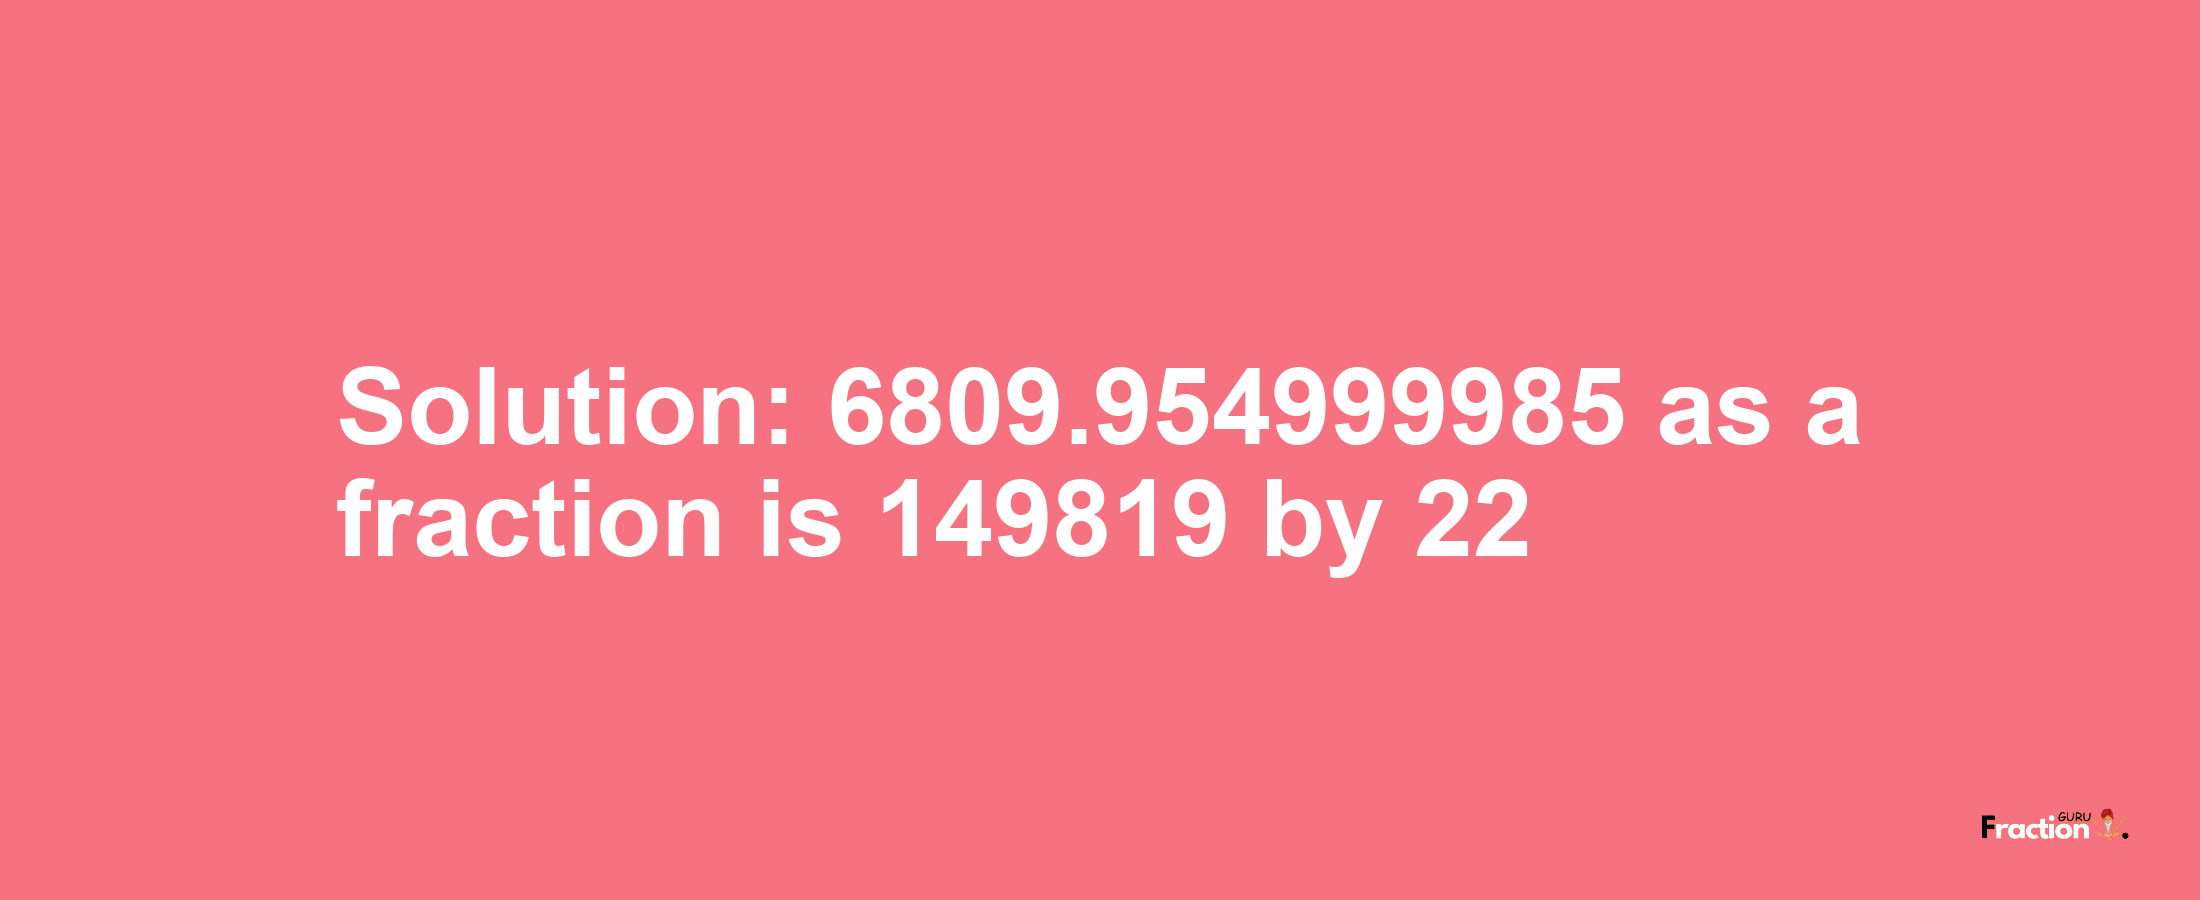 Solution:6809.954999985 as a fraction is 149819/22